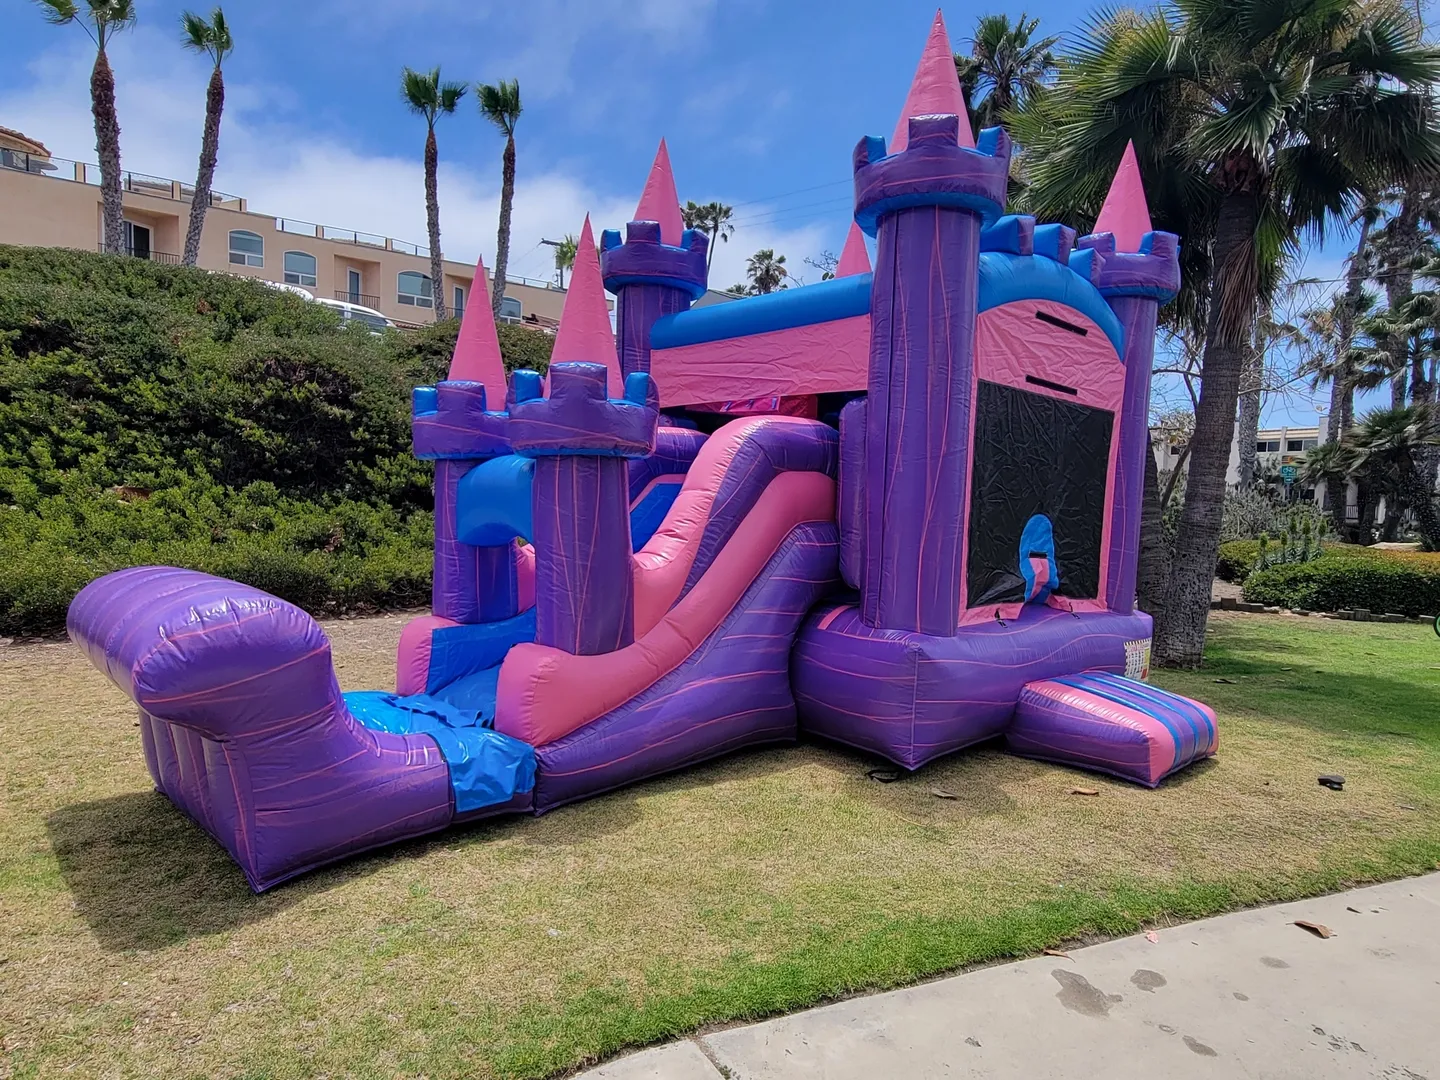 A purple and pink inflatable castle with slide.